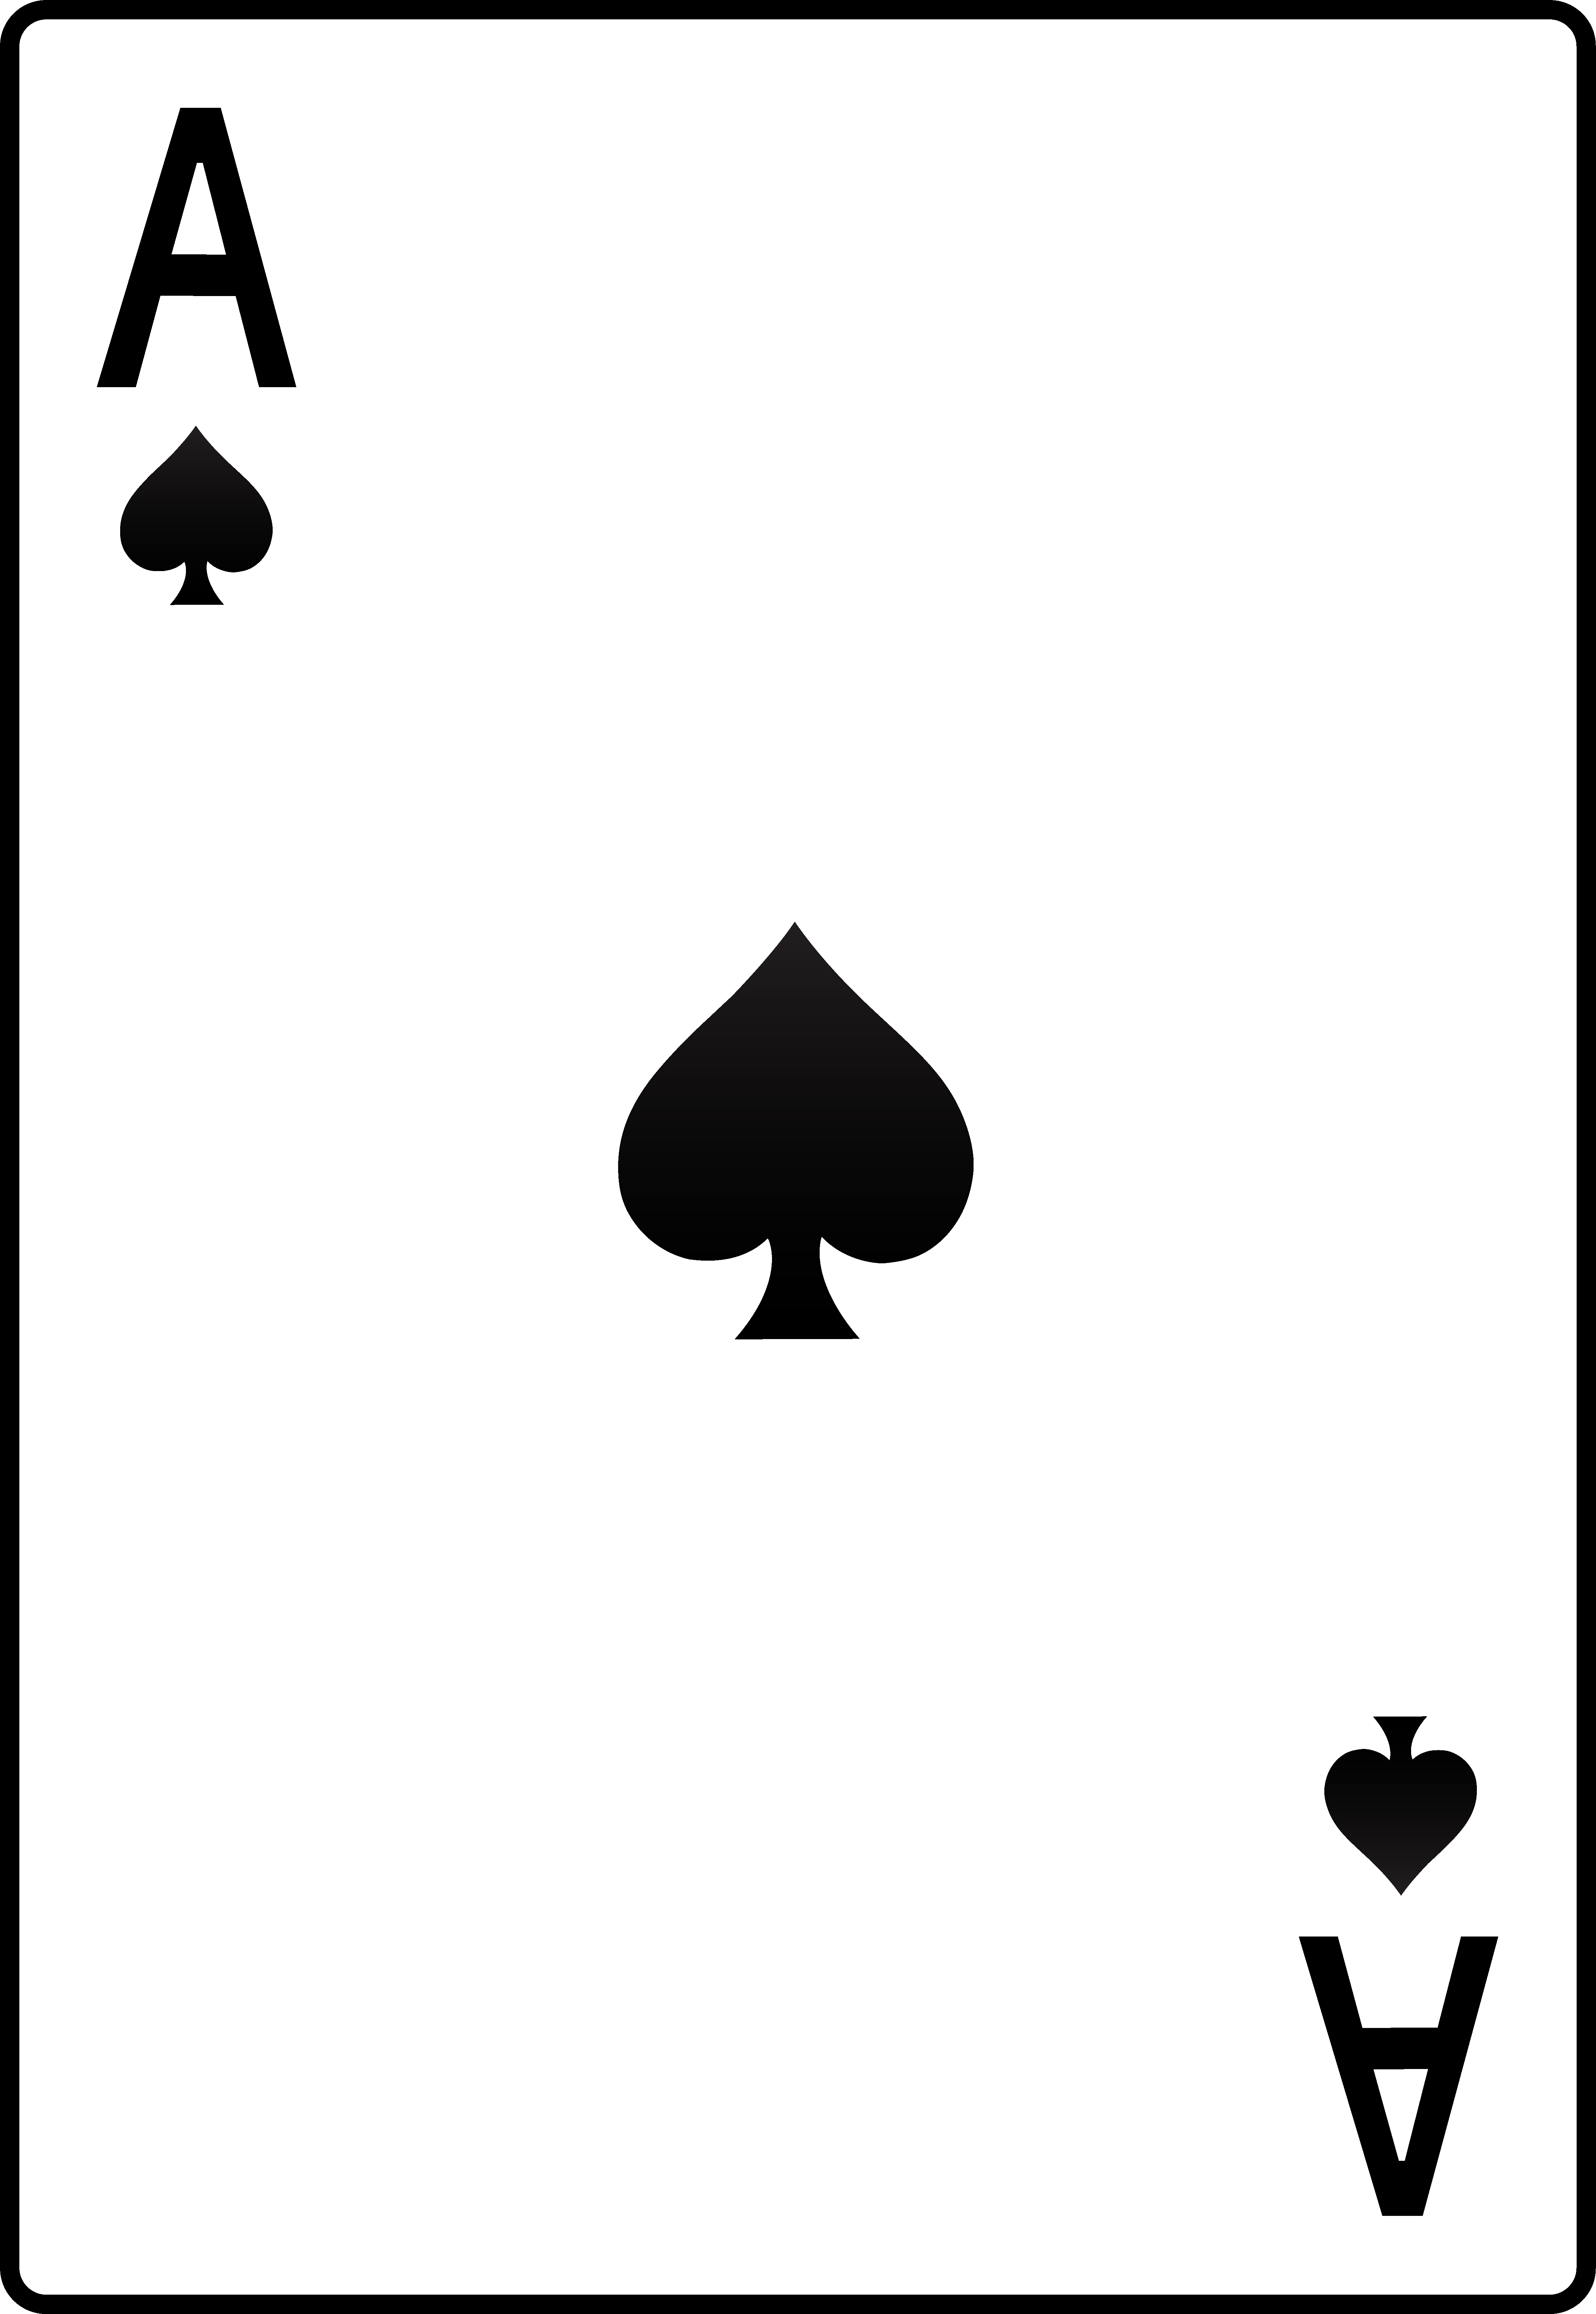 Ace of Spades Playing Card - Free Clip Art